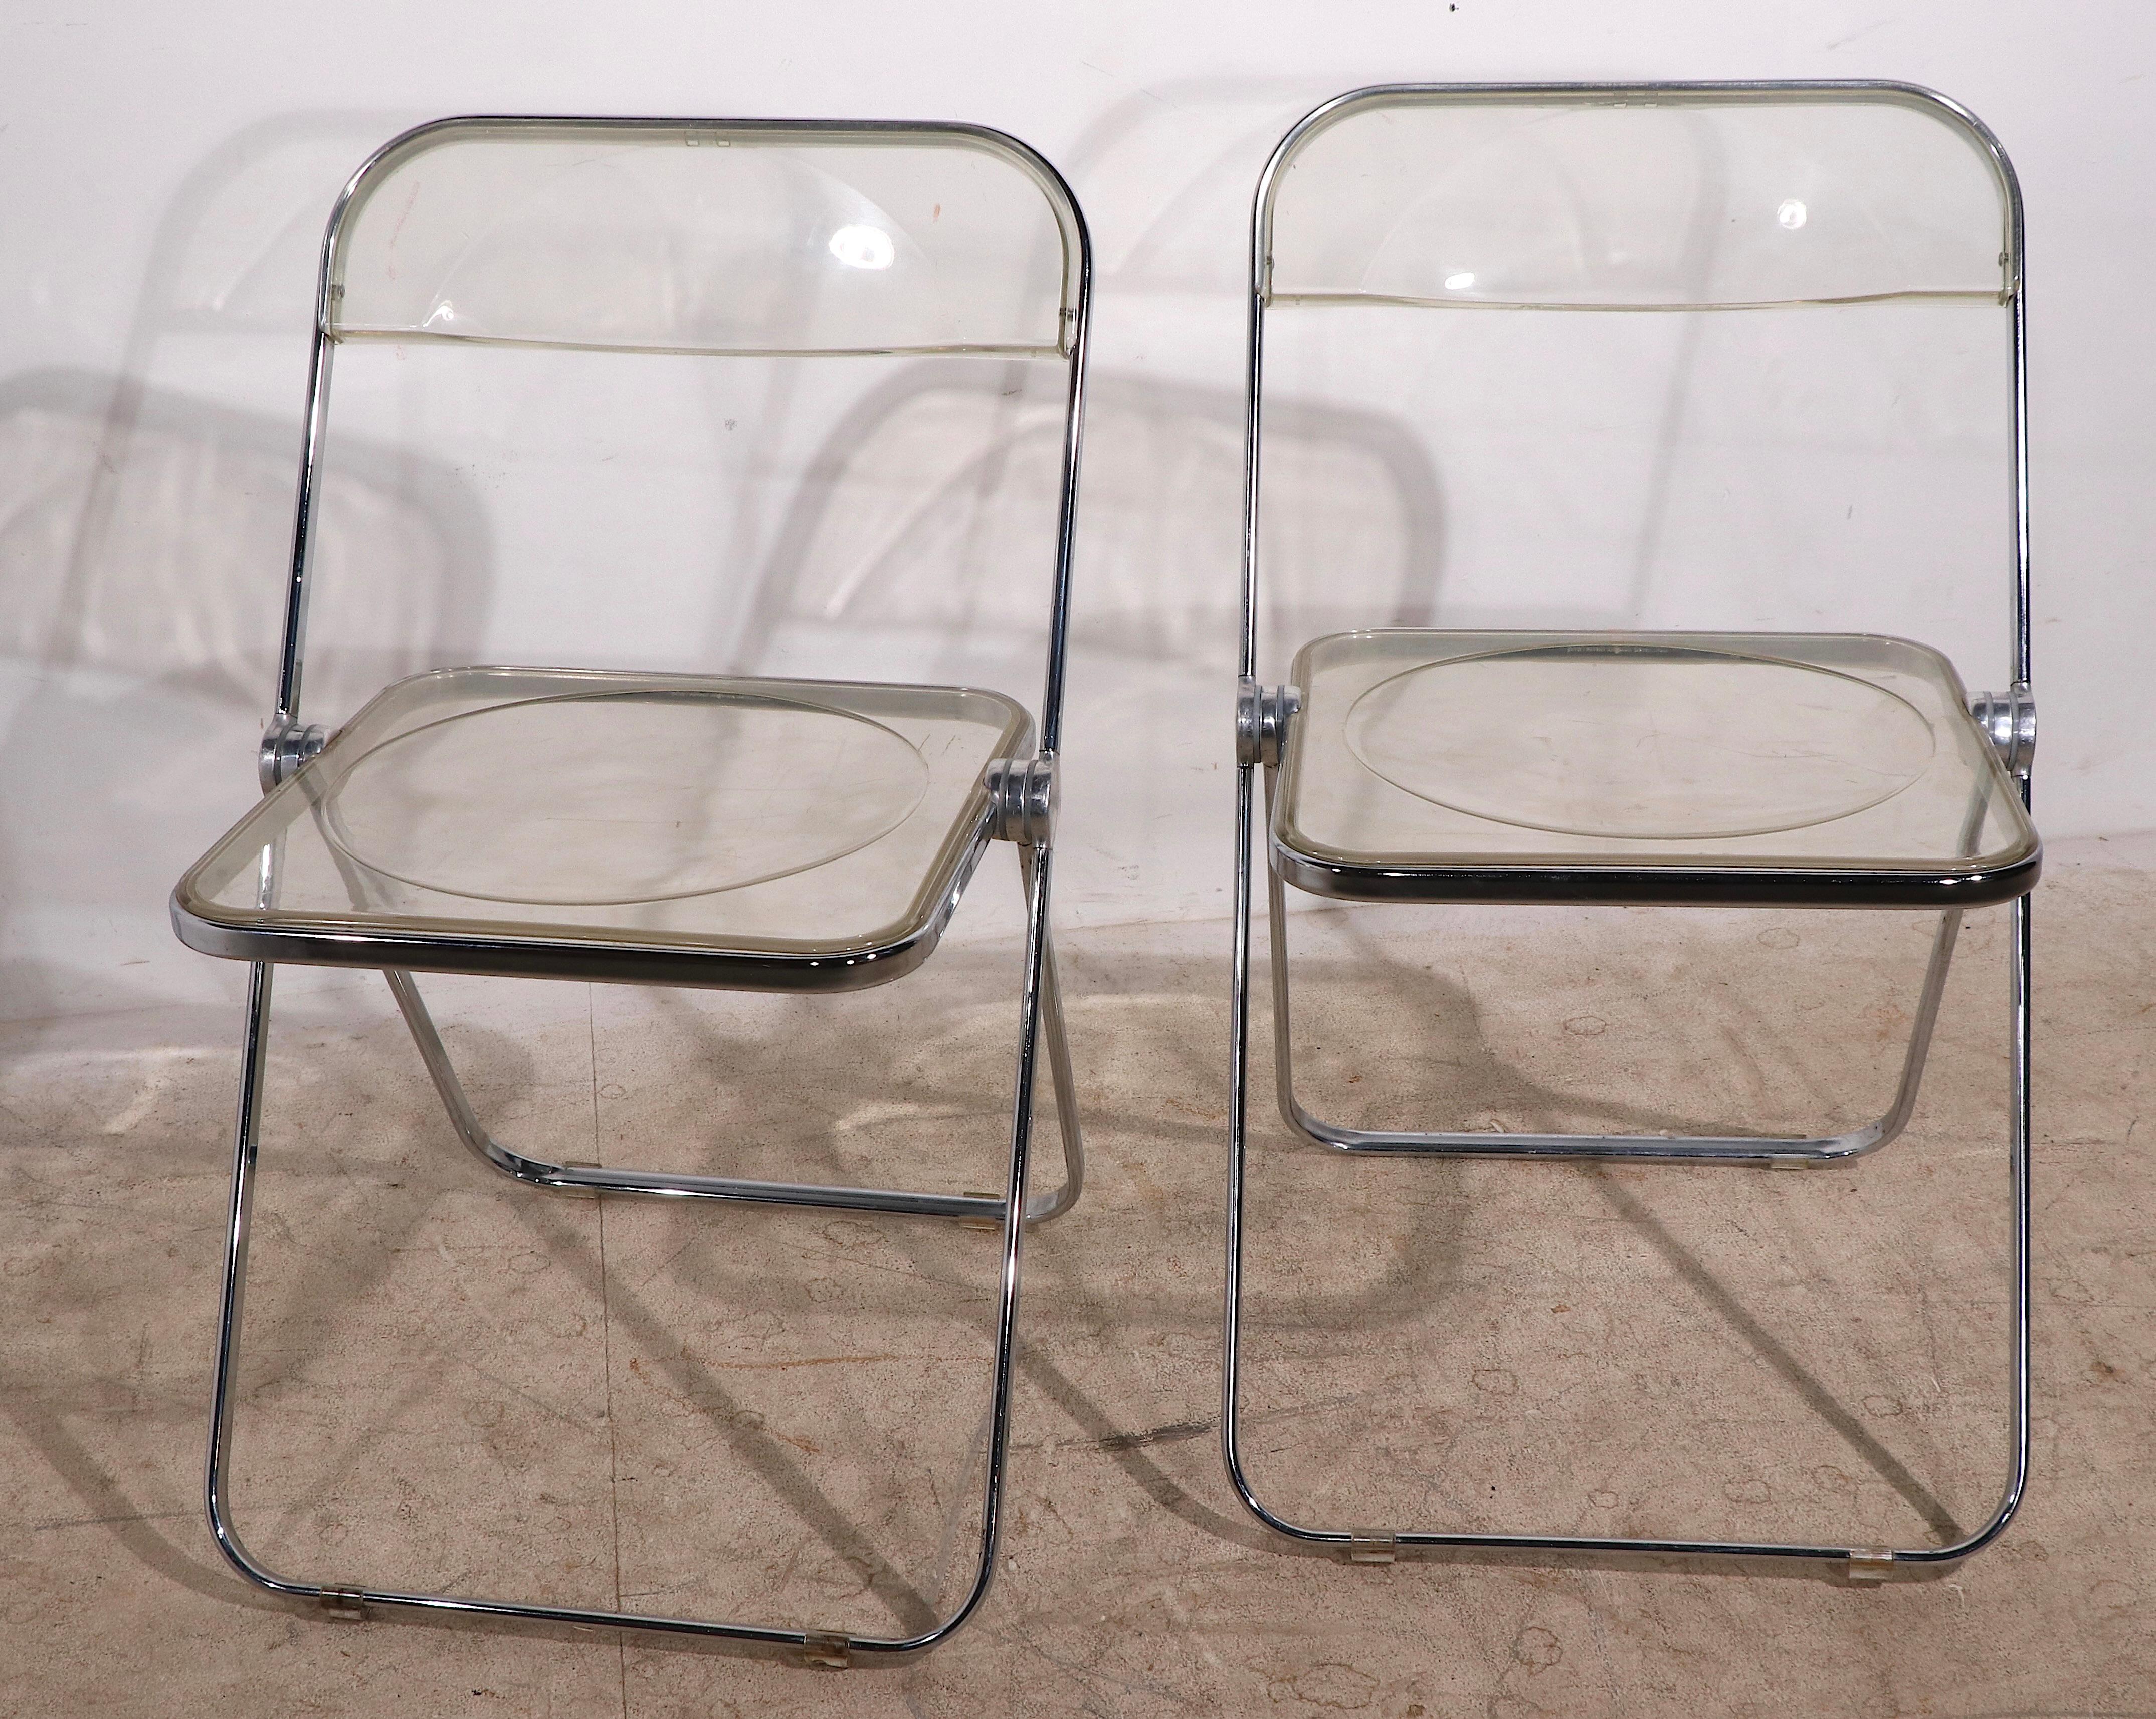 Iconic pair of Italian made Post Modern, Space Age folding chairs, comprised of lucite and aluminum. Both are in very good, original condition, and both are fully and correctly marked ( Plia Castelli ). This timeless design still feels modern, and